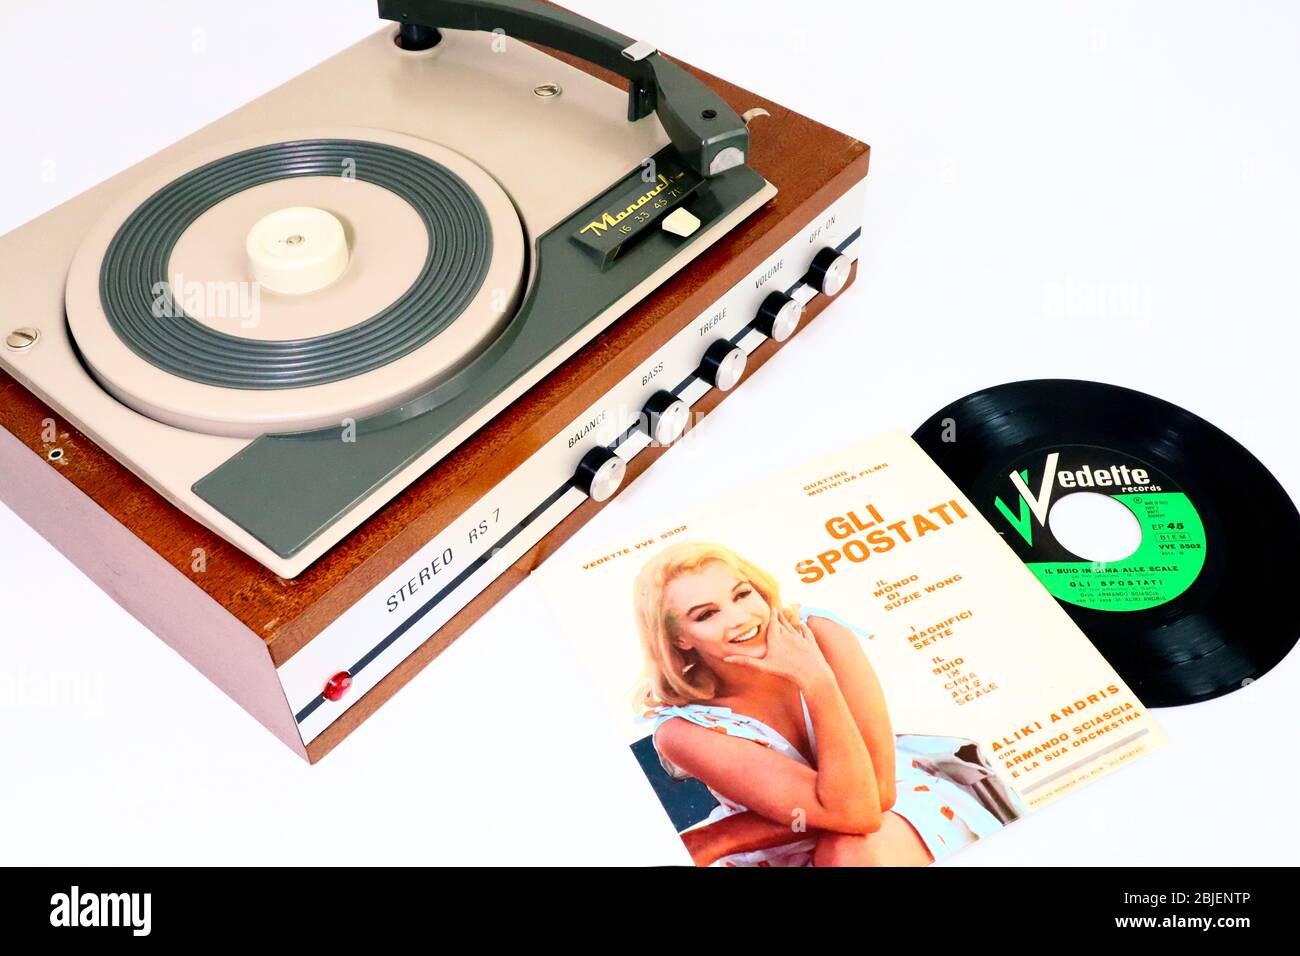 MARILYN MONROE, THE MISFITS 1961 Movie Soundtrack EP Vinyl Record, VEDETTE Italian Label on MONARCH Record Player Stock Photo